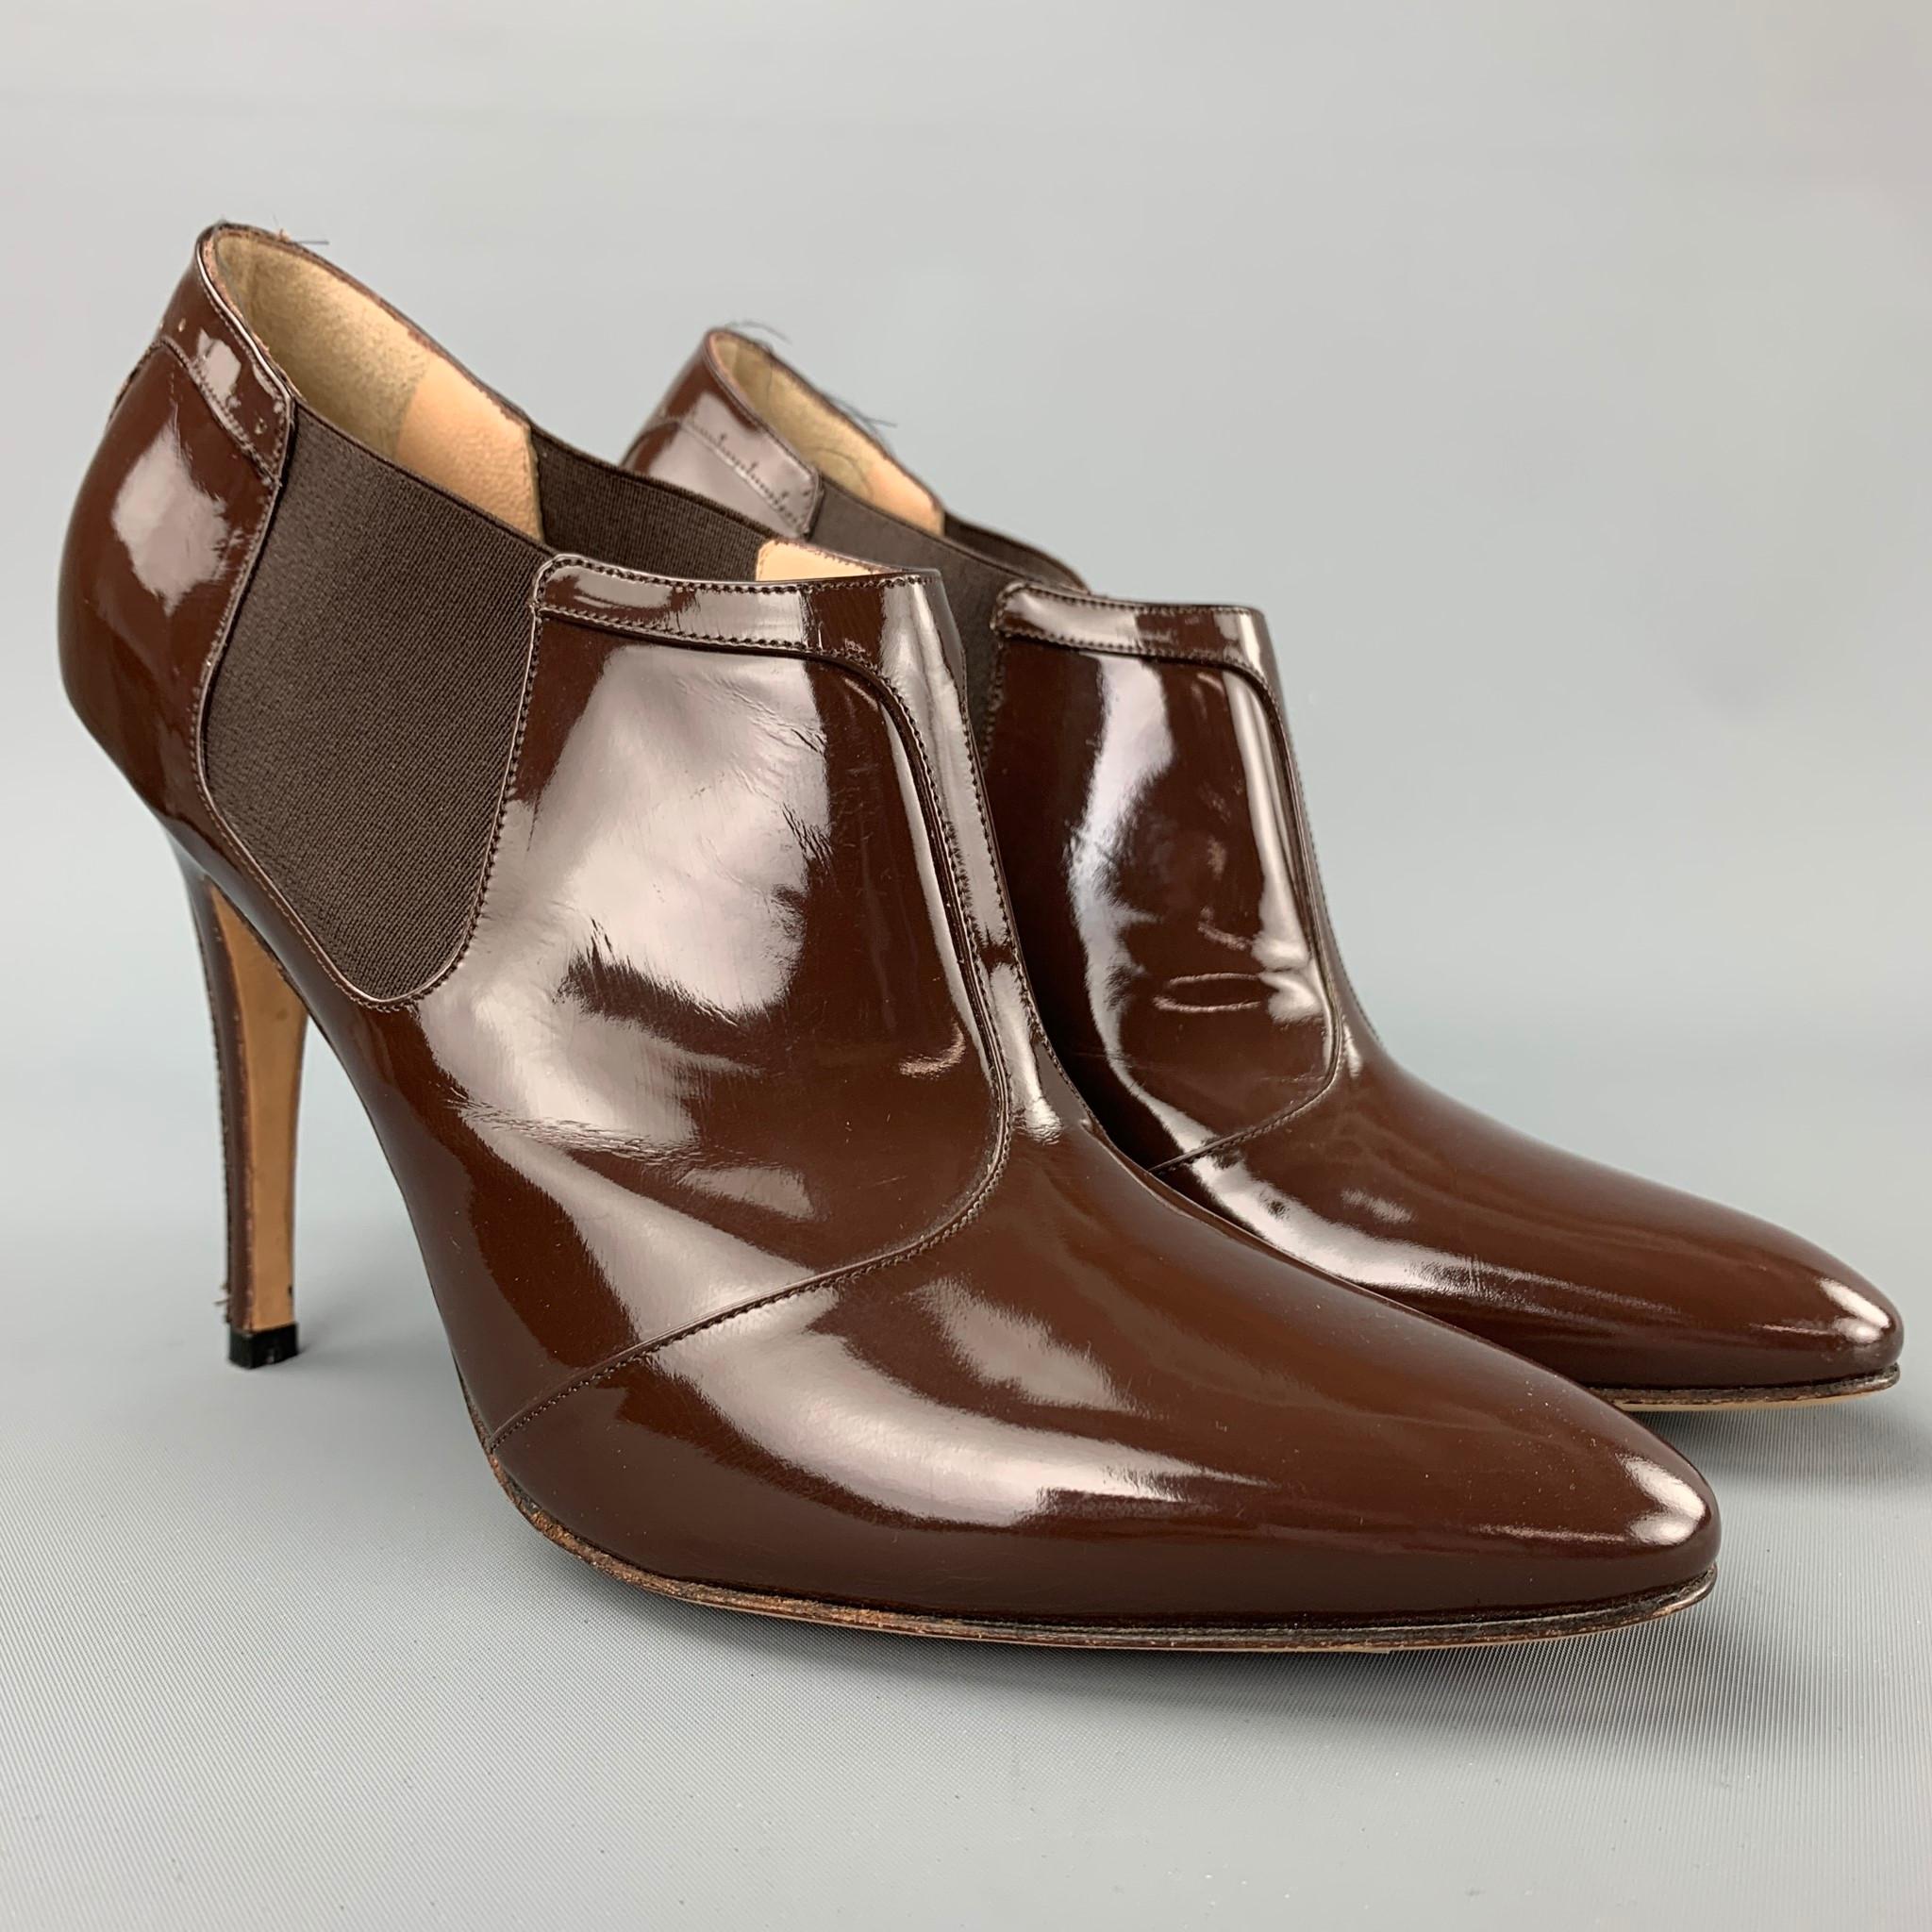 MANOLO BLAHNIK booties comes in a brown patent leather featuring a pointed toe, elastic side, and a stiletto heel. Made in Italy.

New Without tags. 
Marked: EU 38.5

Measurements:

Heel: 4 in. 